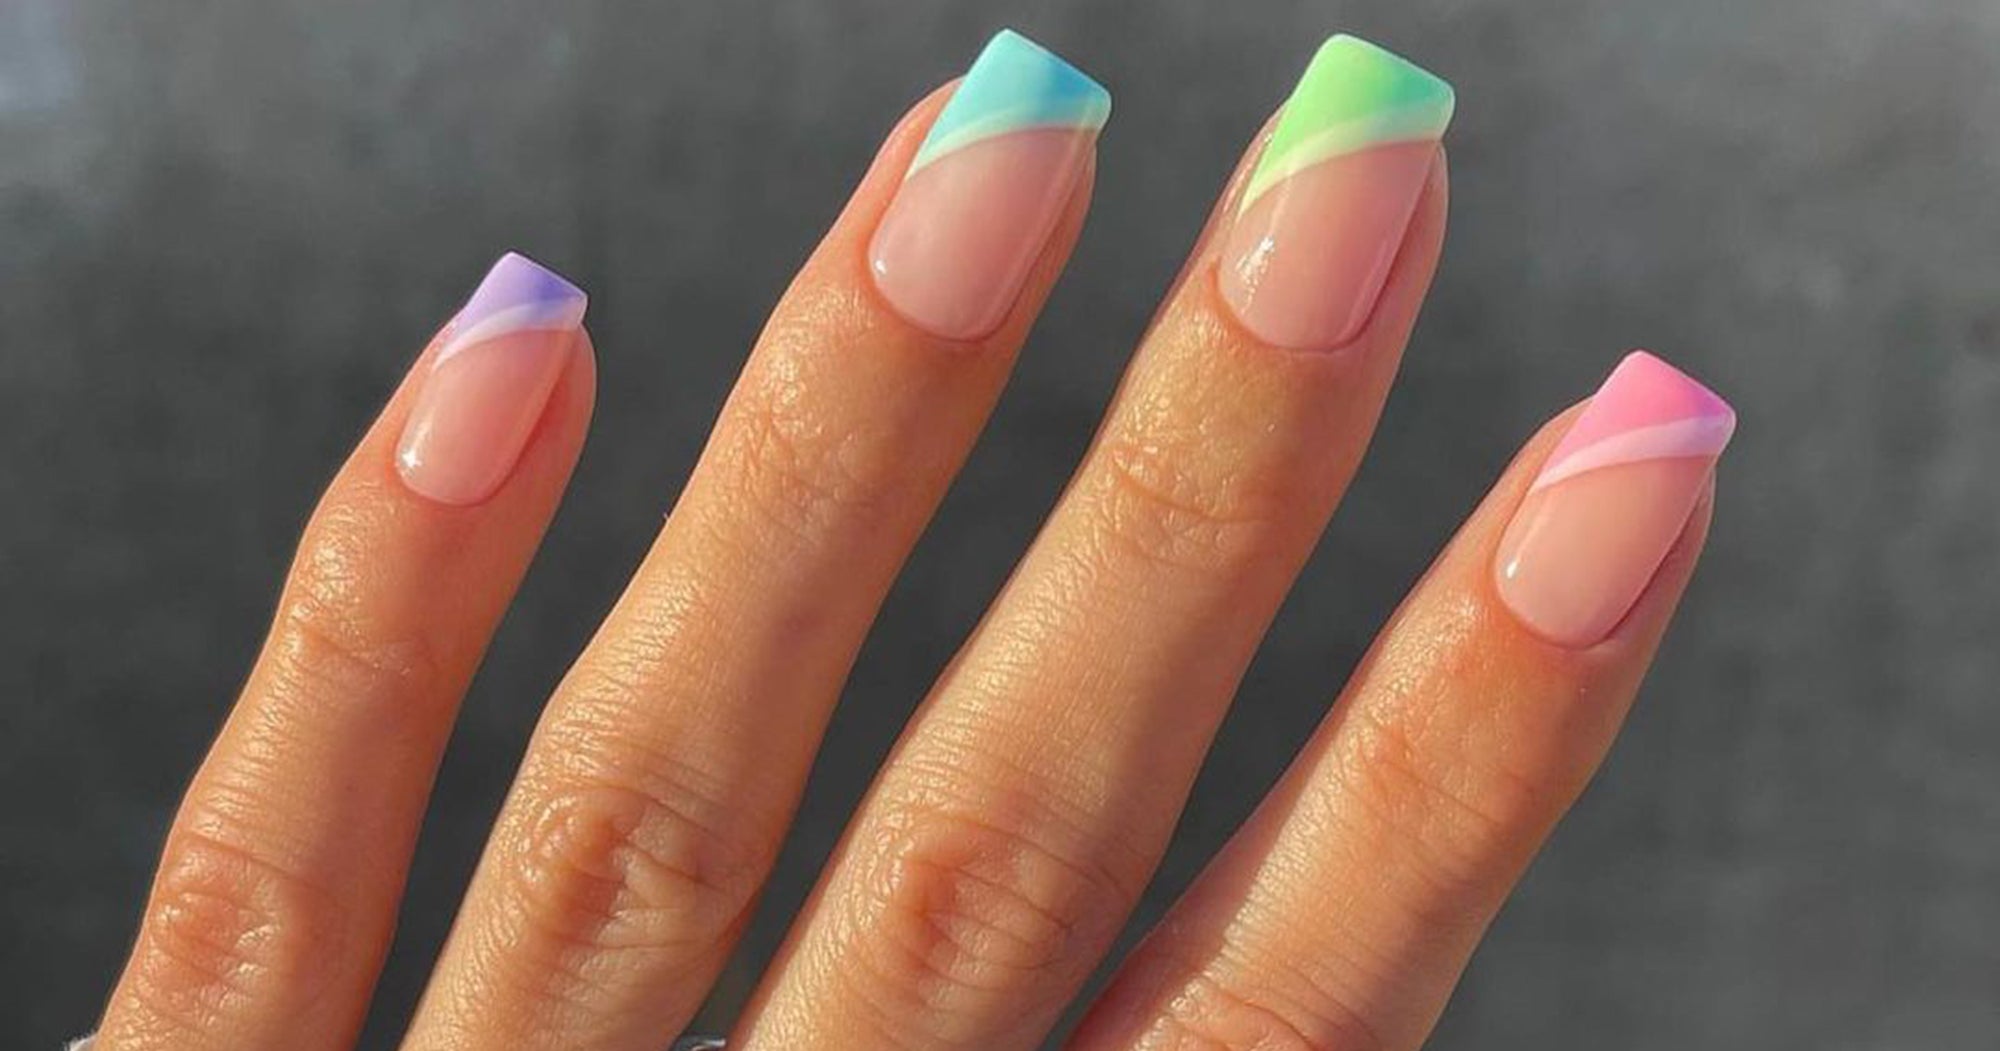 12 Alternative French Manicure Ideas To Ask For This Summer